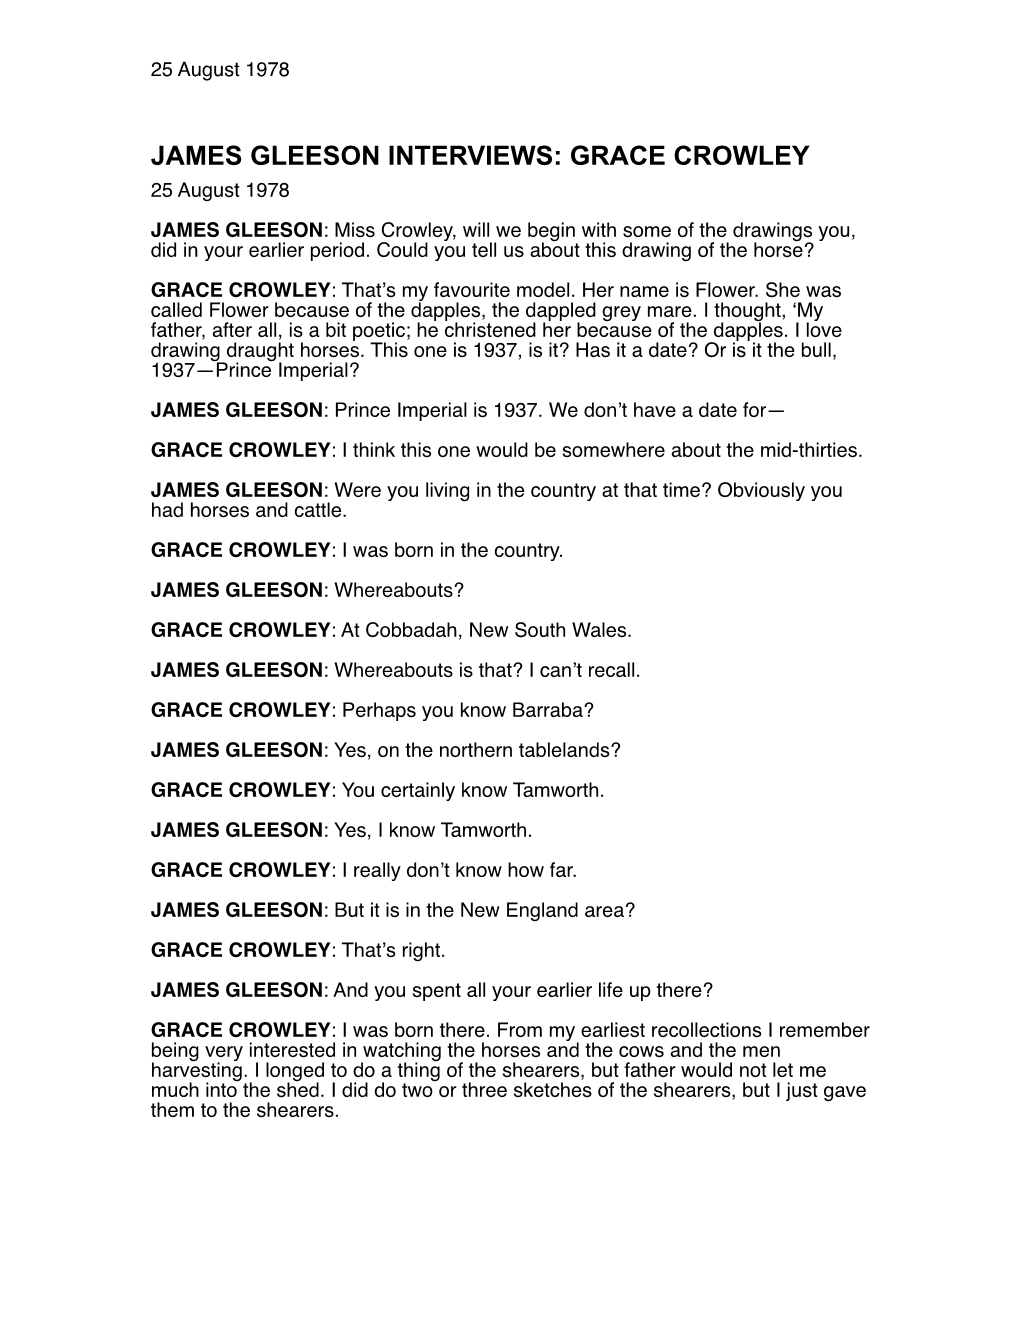 JAMES GLEESON INTERVIEWS: GRACE CROWLEY 25 August 1978 JAMES GLEESON: Miss Crowley, Will We Begin with Some of the Drawings You, Did in Your Earlier Period